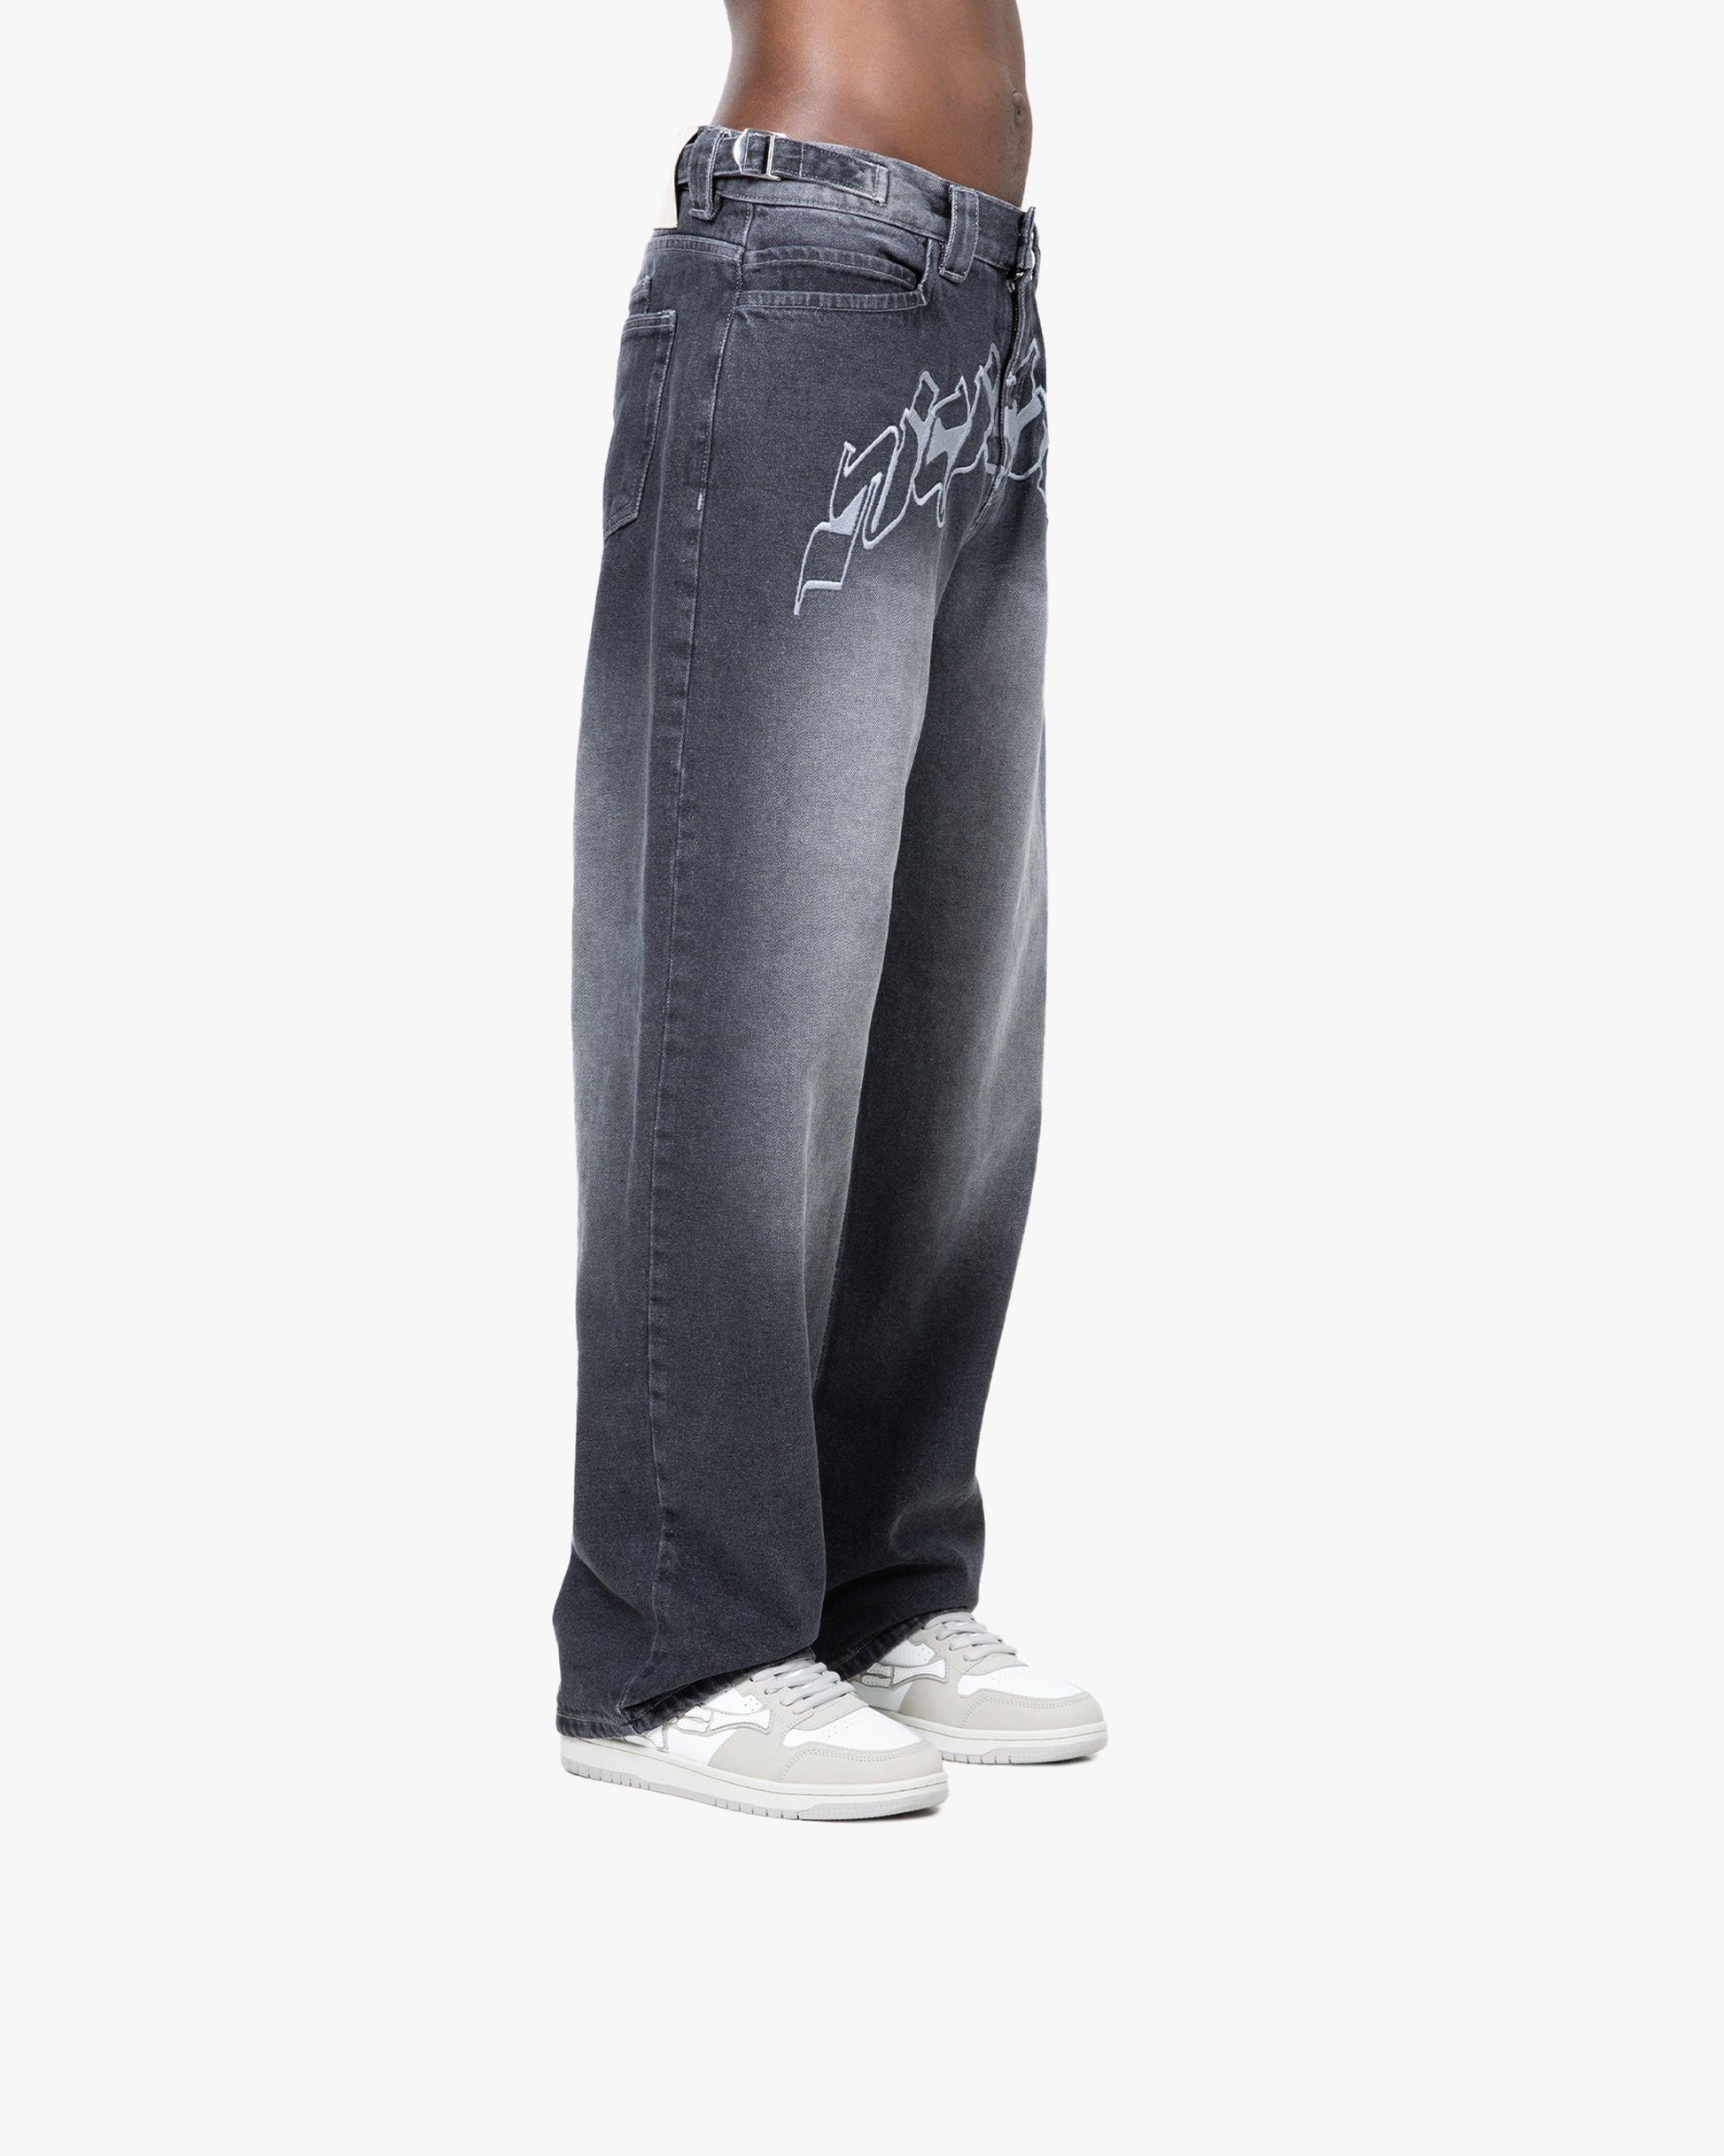 OUTLINED MIRAGE DENIM GREY / WHITE - VICINITY